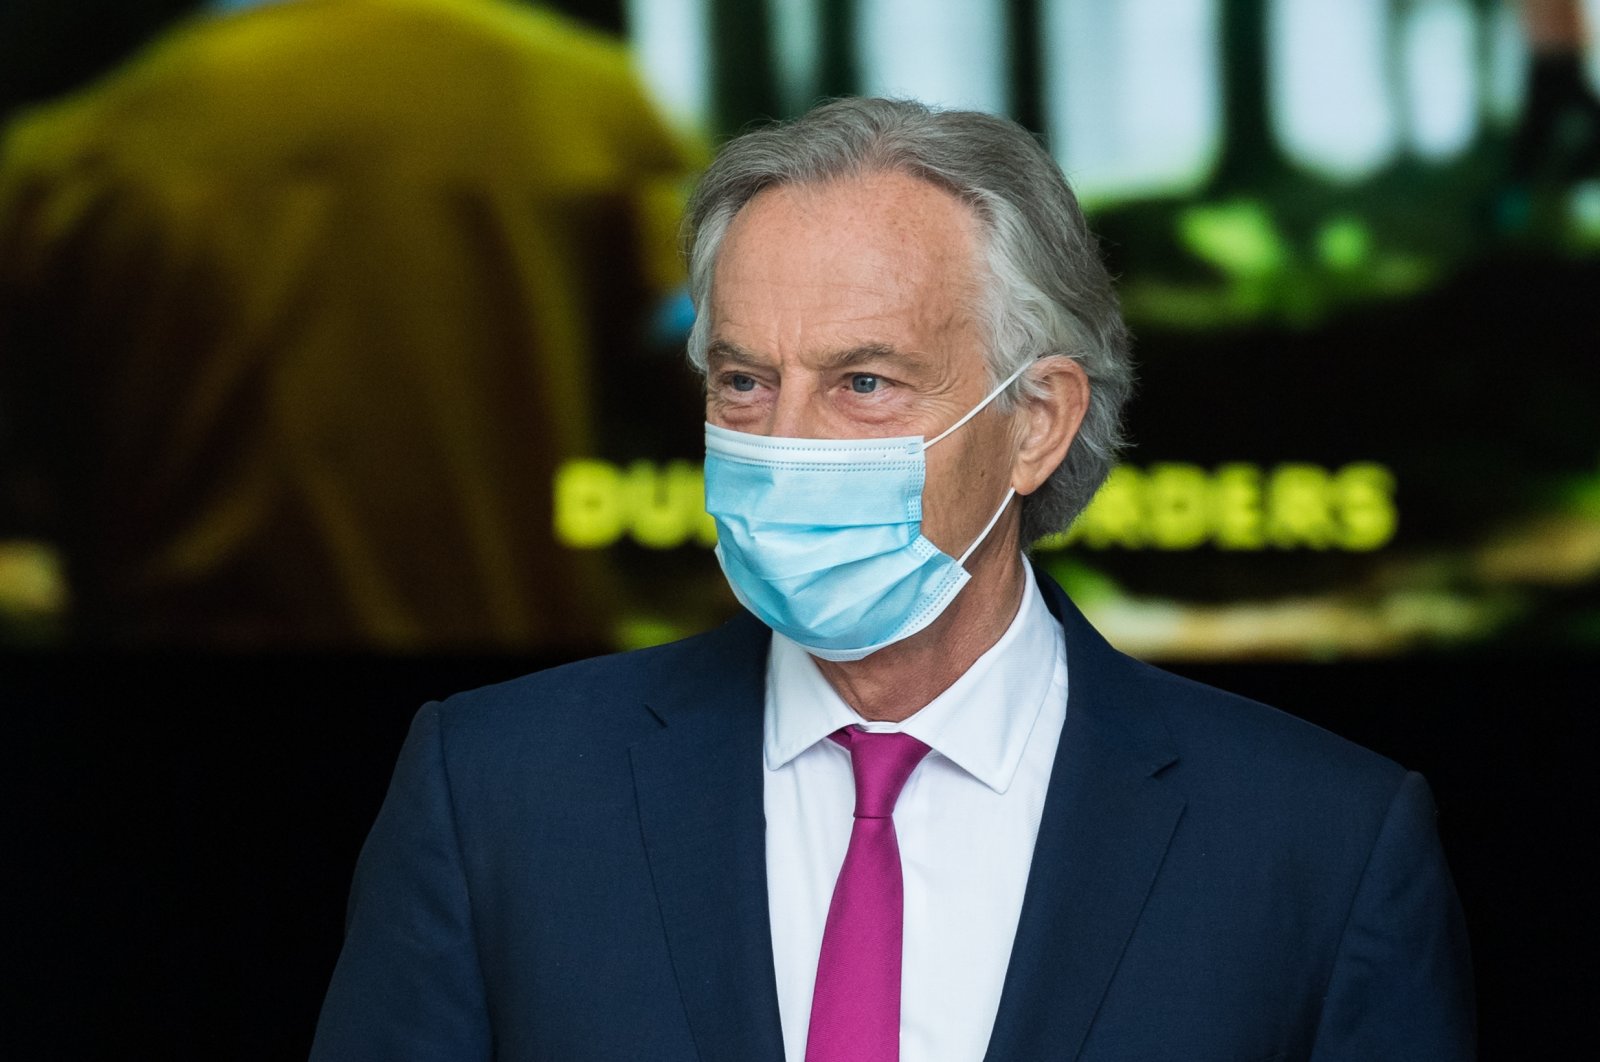 Former British Prime Minister Tony Blair leaves the BBC Broadcasting House in central London after appearing on The Andrew Marr Show, in London, the U.K., June 6, 2021. (Reuters Photo)